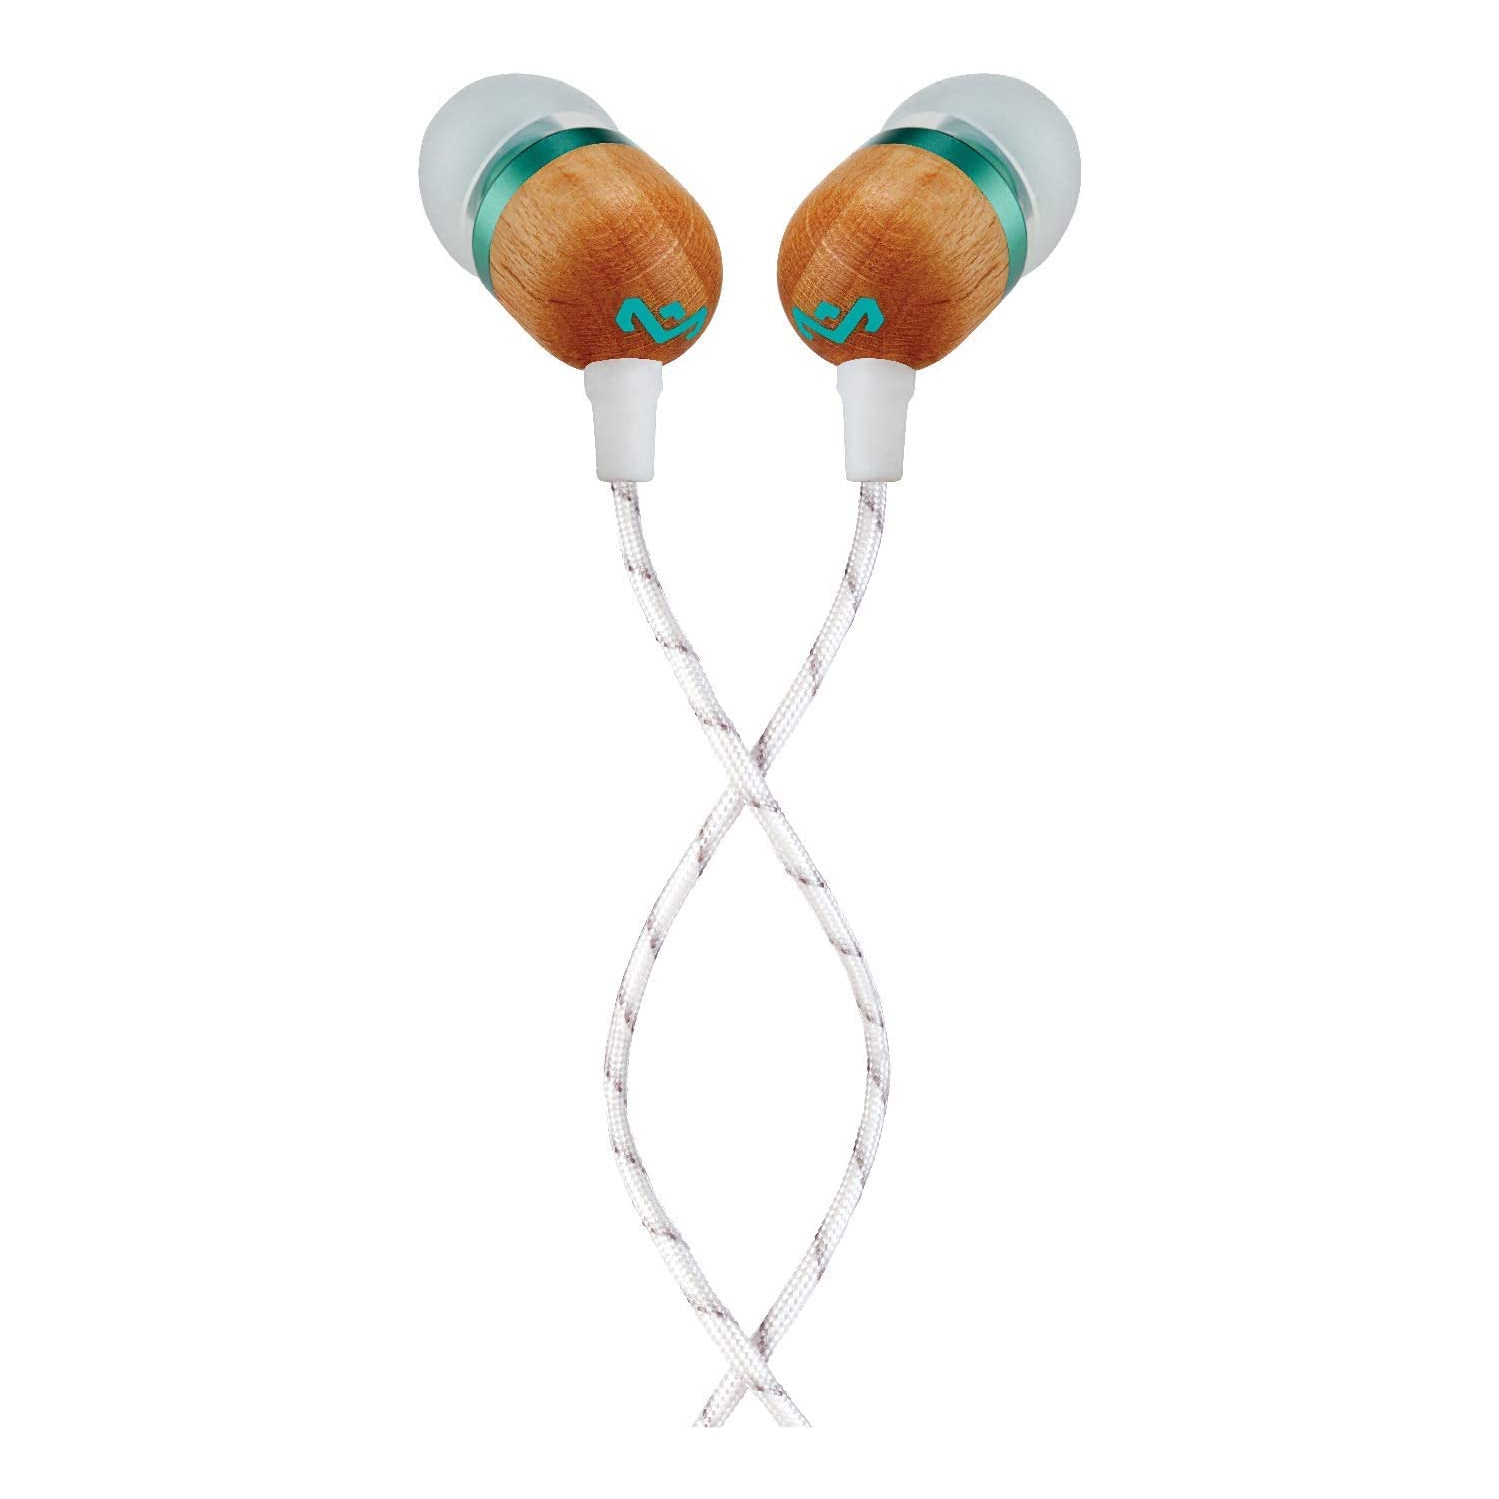 Dolaer House of Marley Smile Jamaica Wired in-Ear Headphones - in-line Microphone with 1-Button Remote Noise Isolating Durable Tangle Free Cable Mint